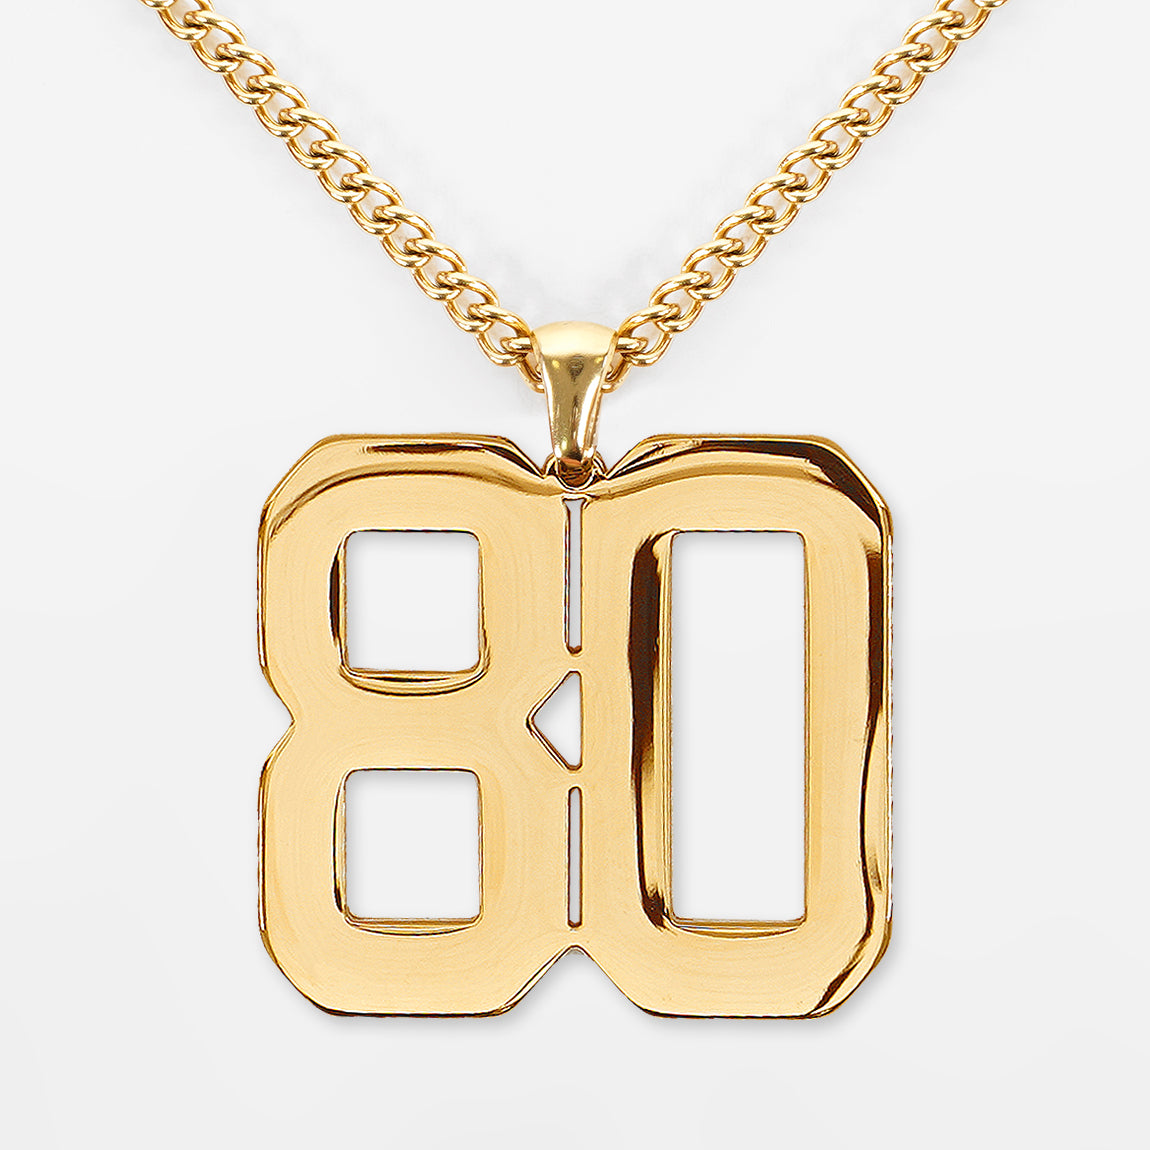 80 Number Pendant with Chain Necklace - Gold Plated Stainless Steel